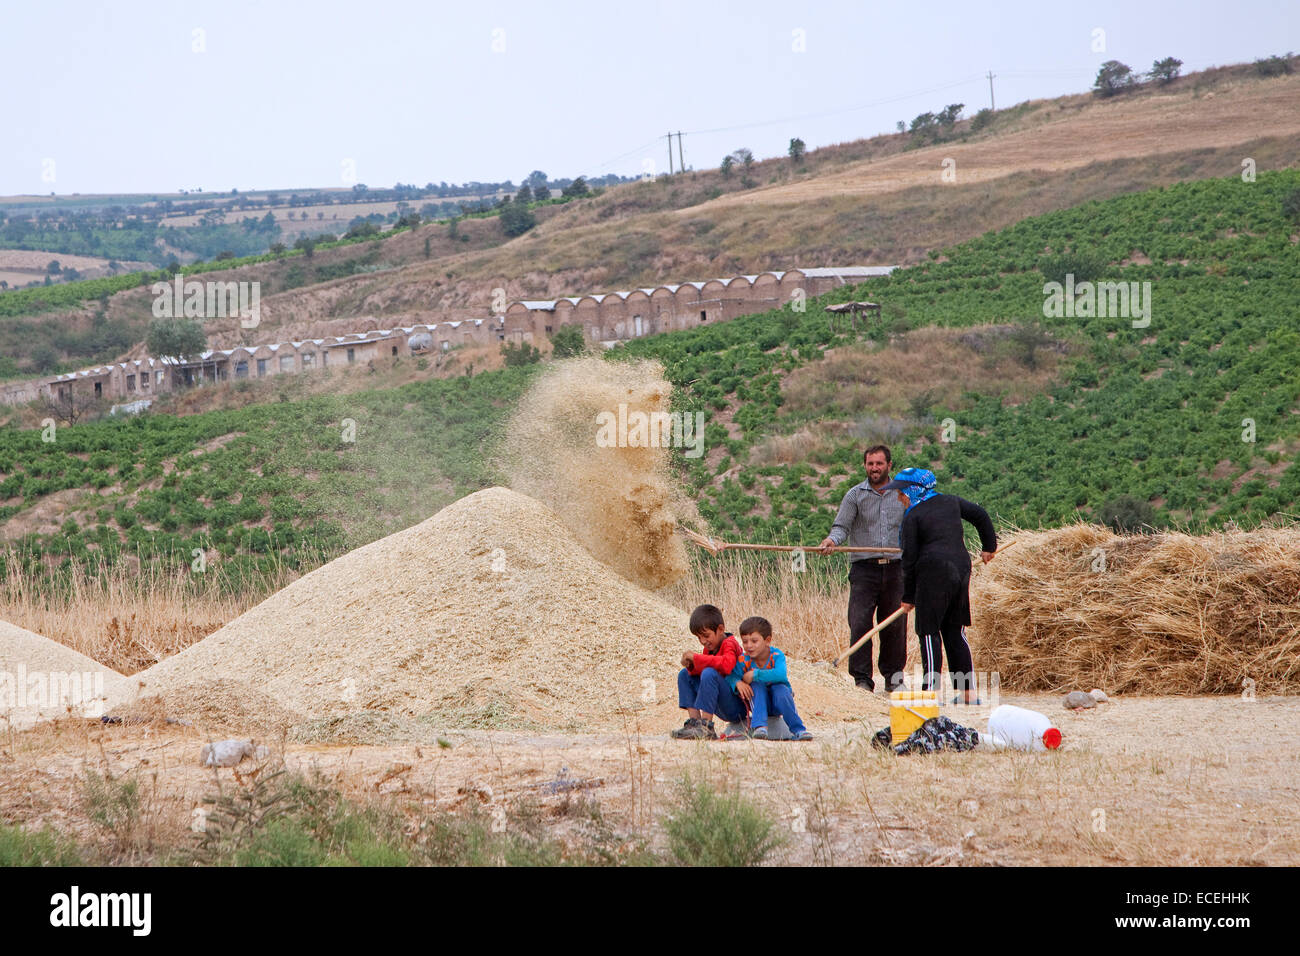 Farmer with wife and children working on cereal harvest in Iran Stock Photo